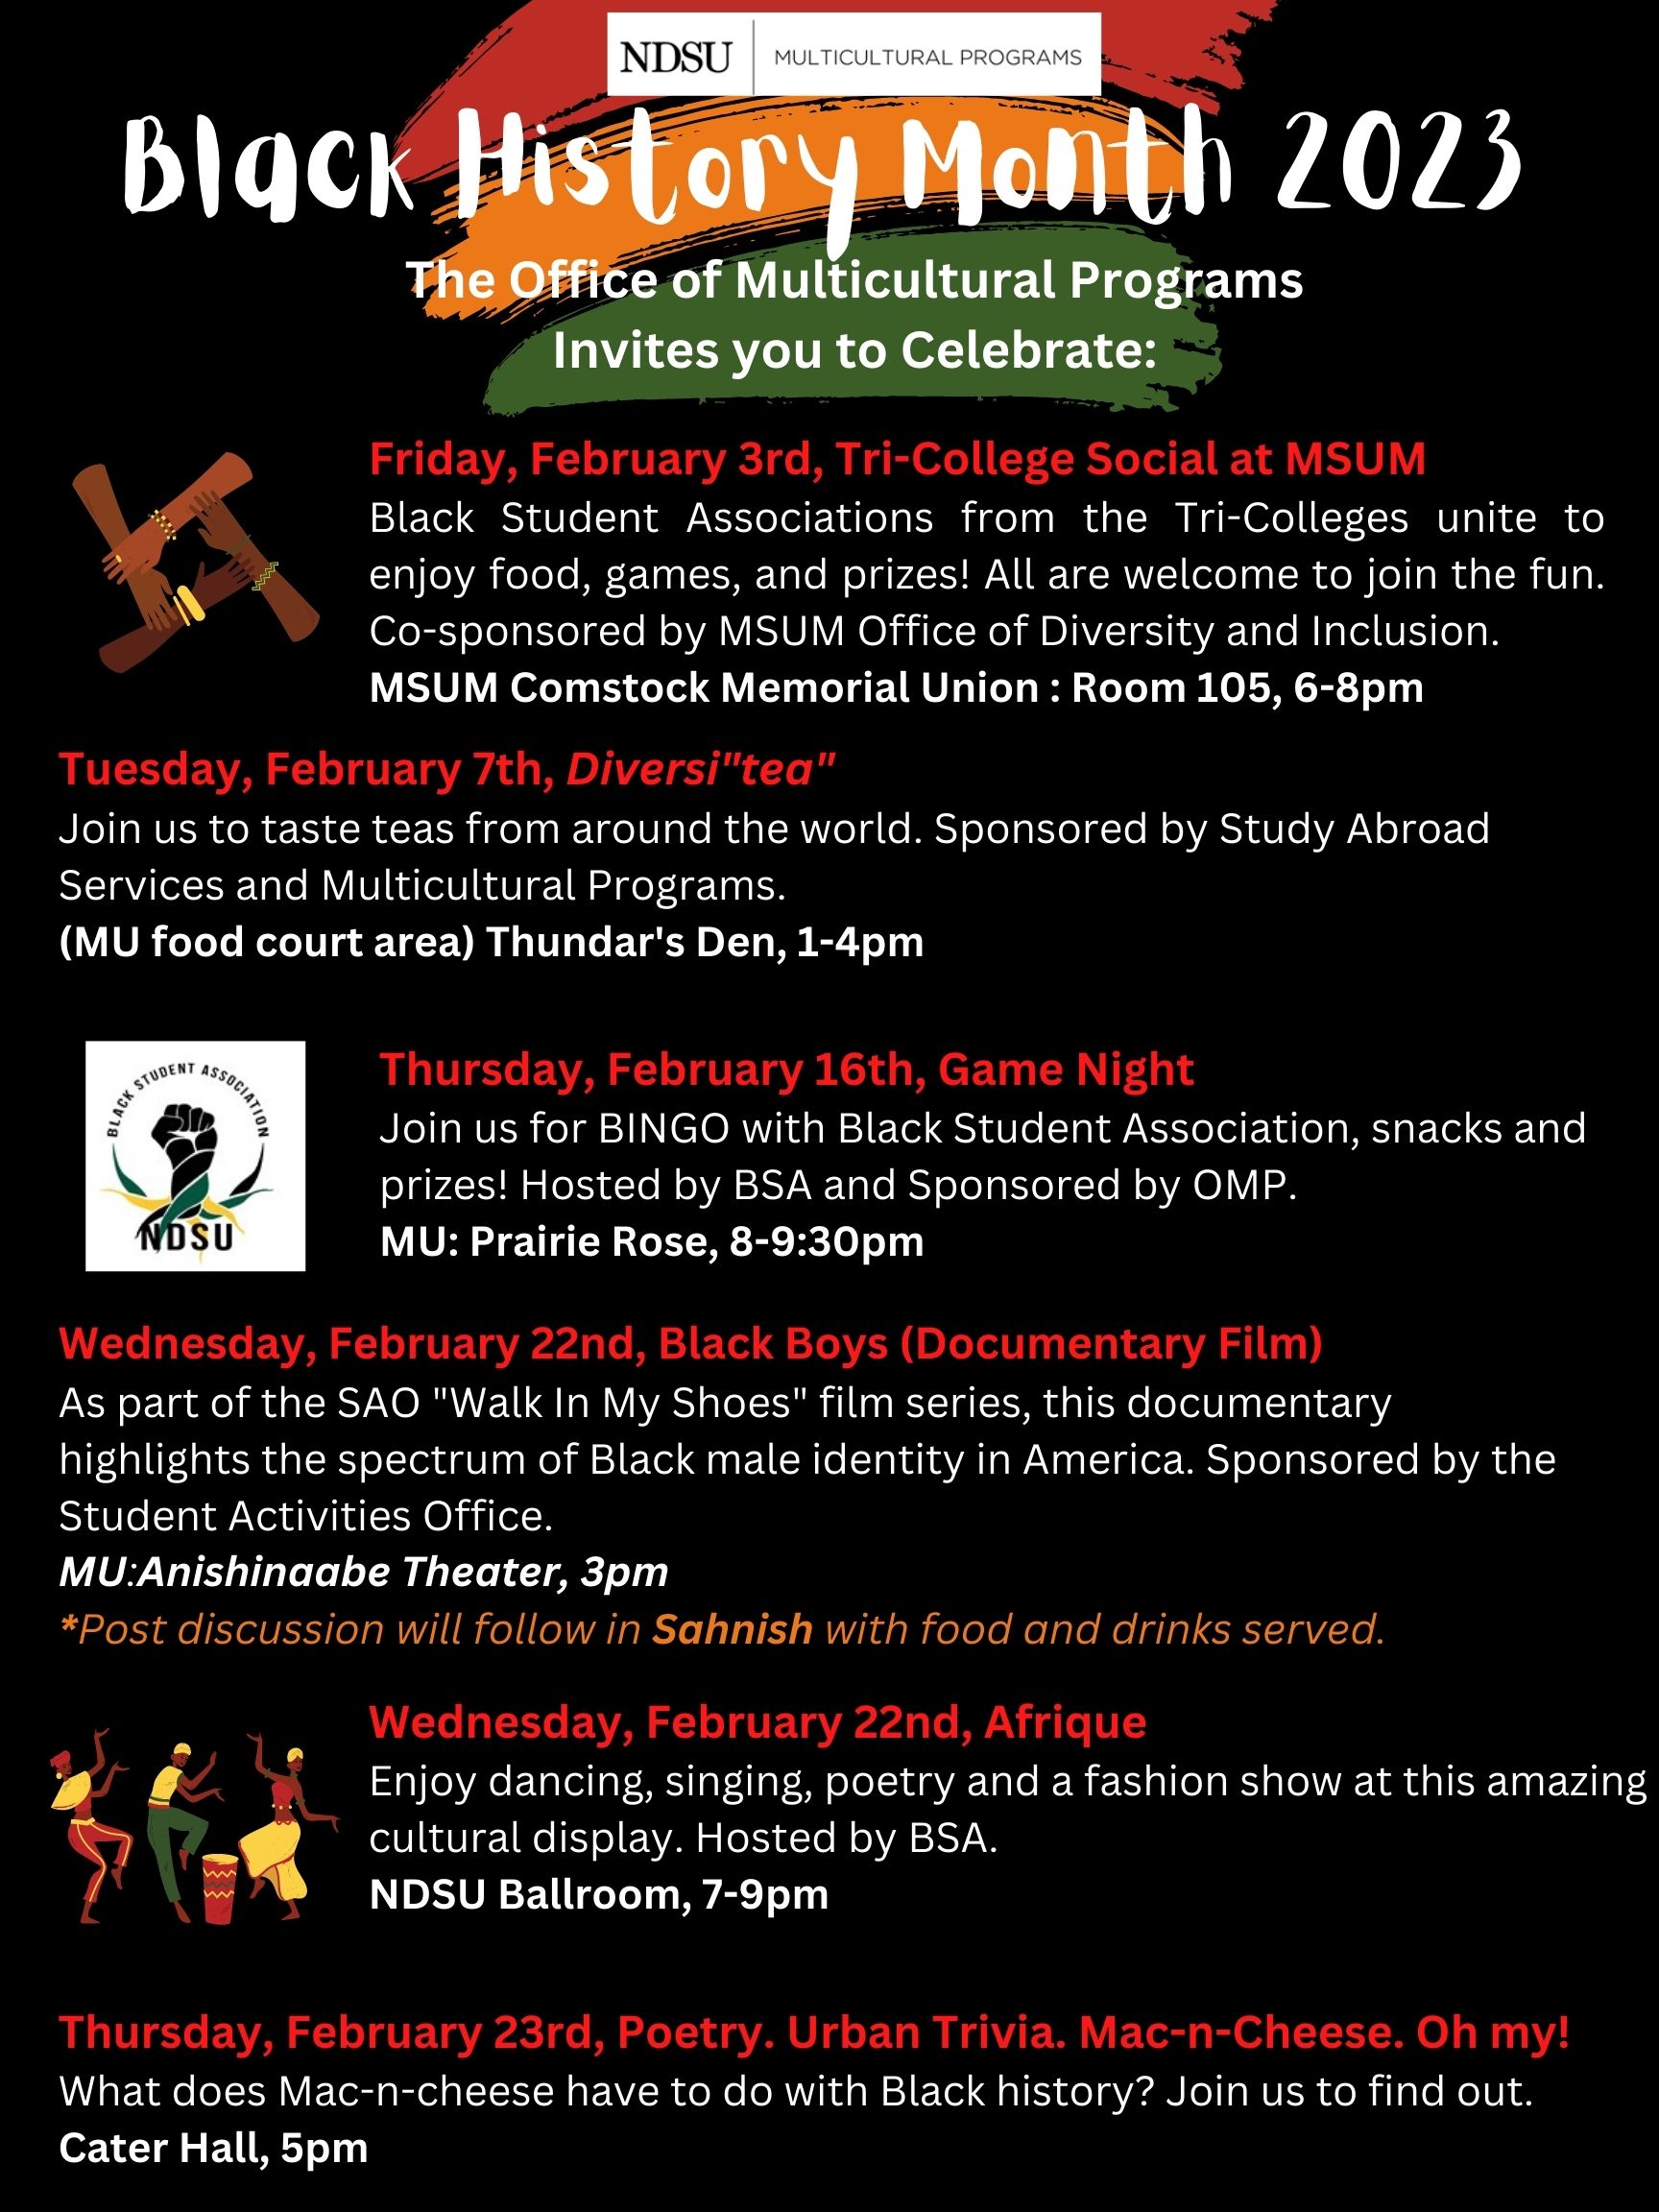 Events for Black History Month